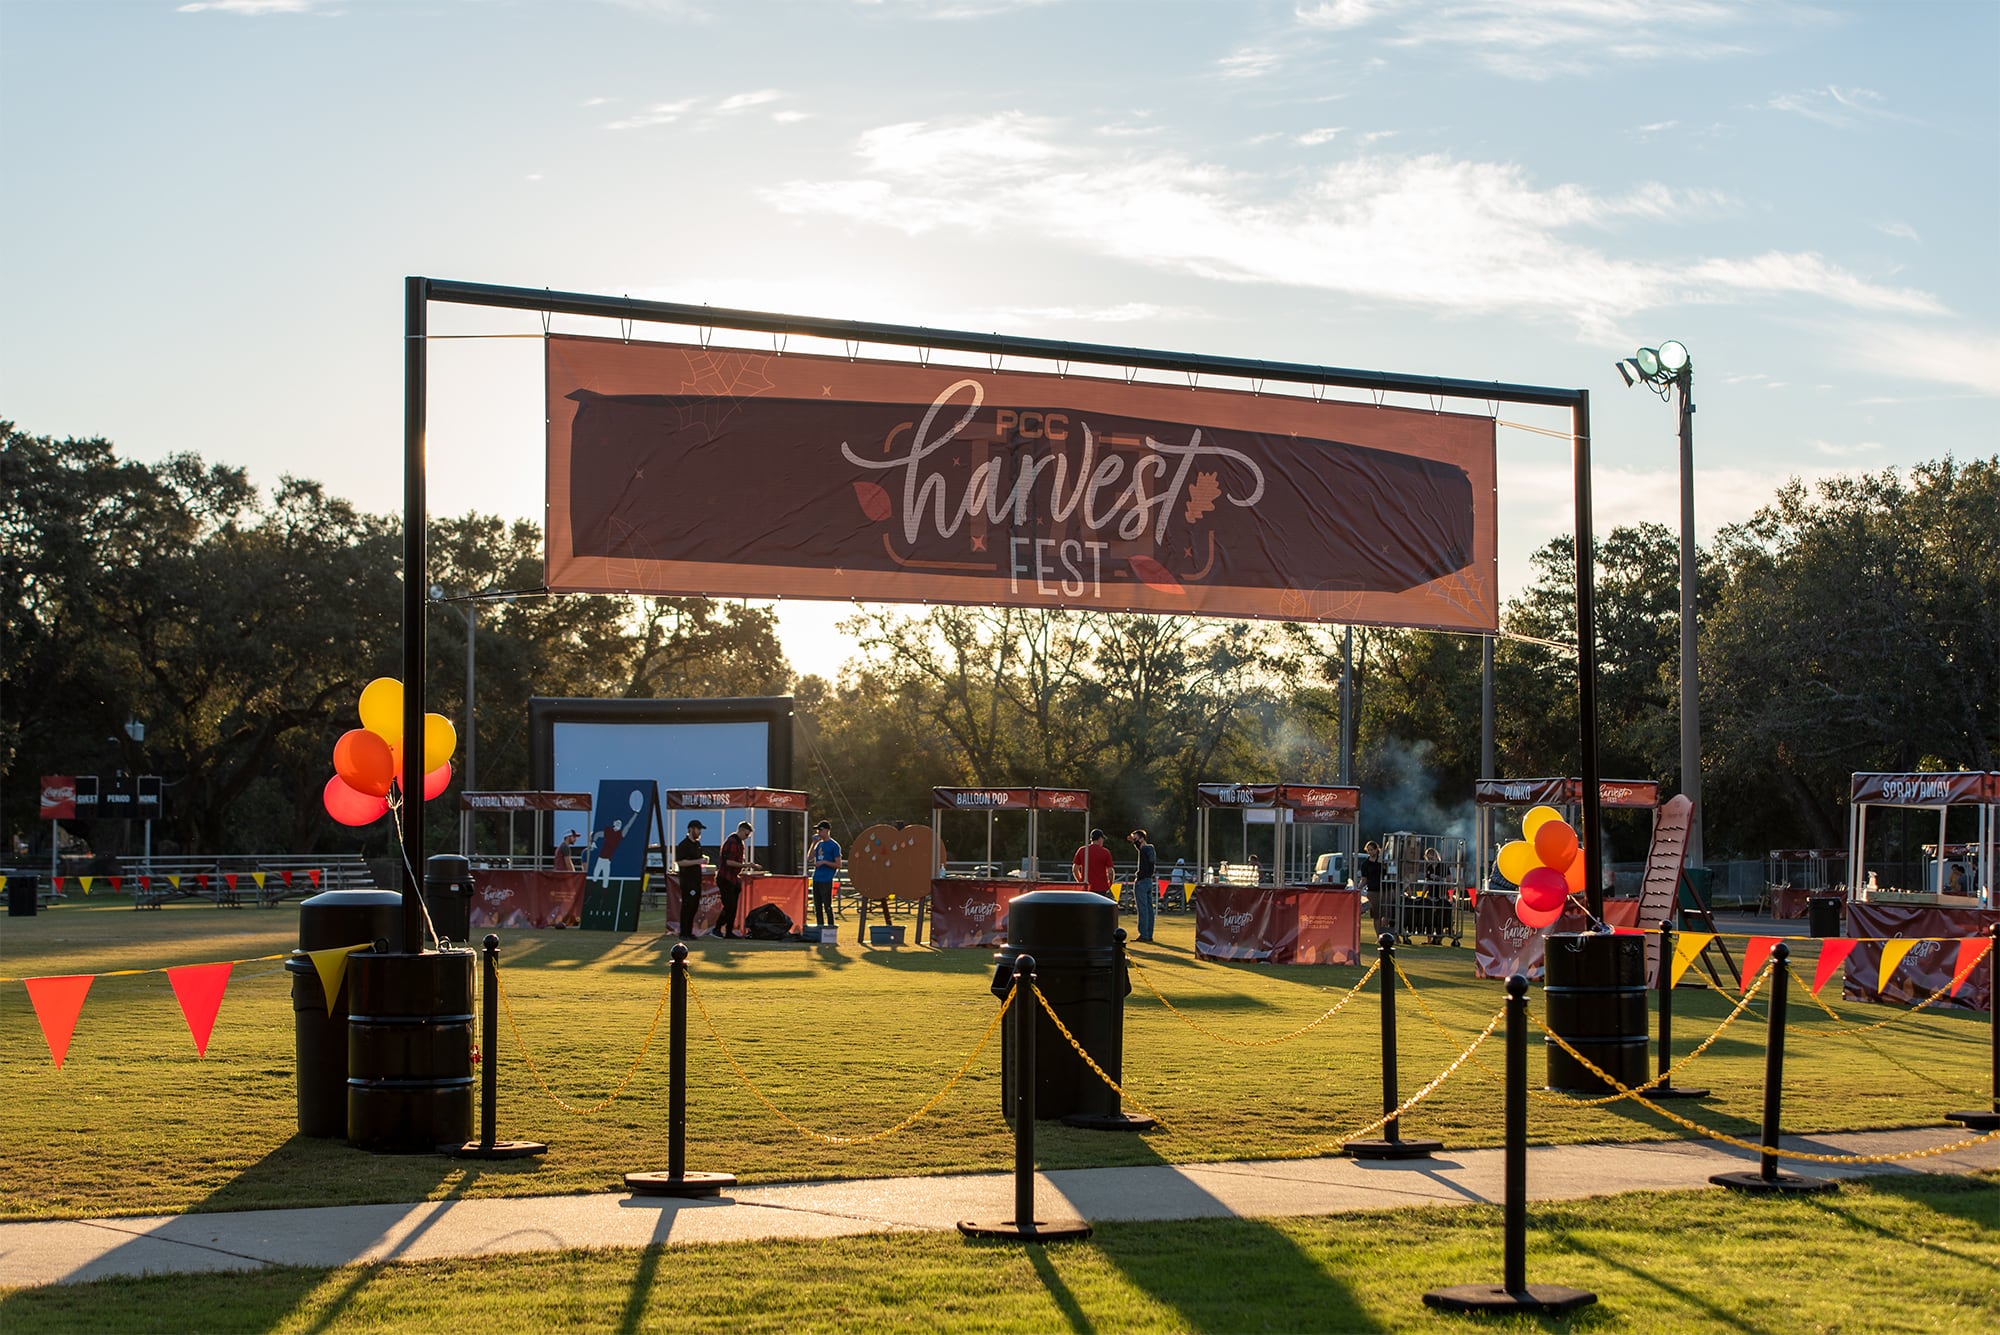 Student body hosted a harvest fest to raise money for missions